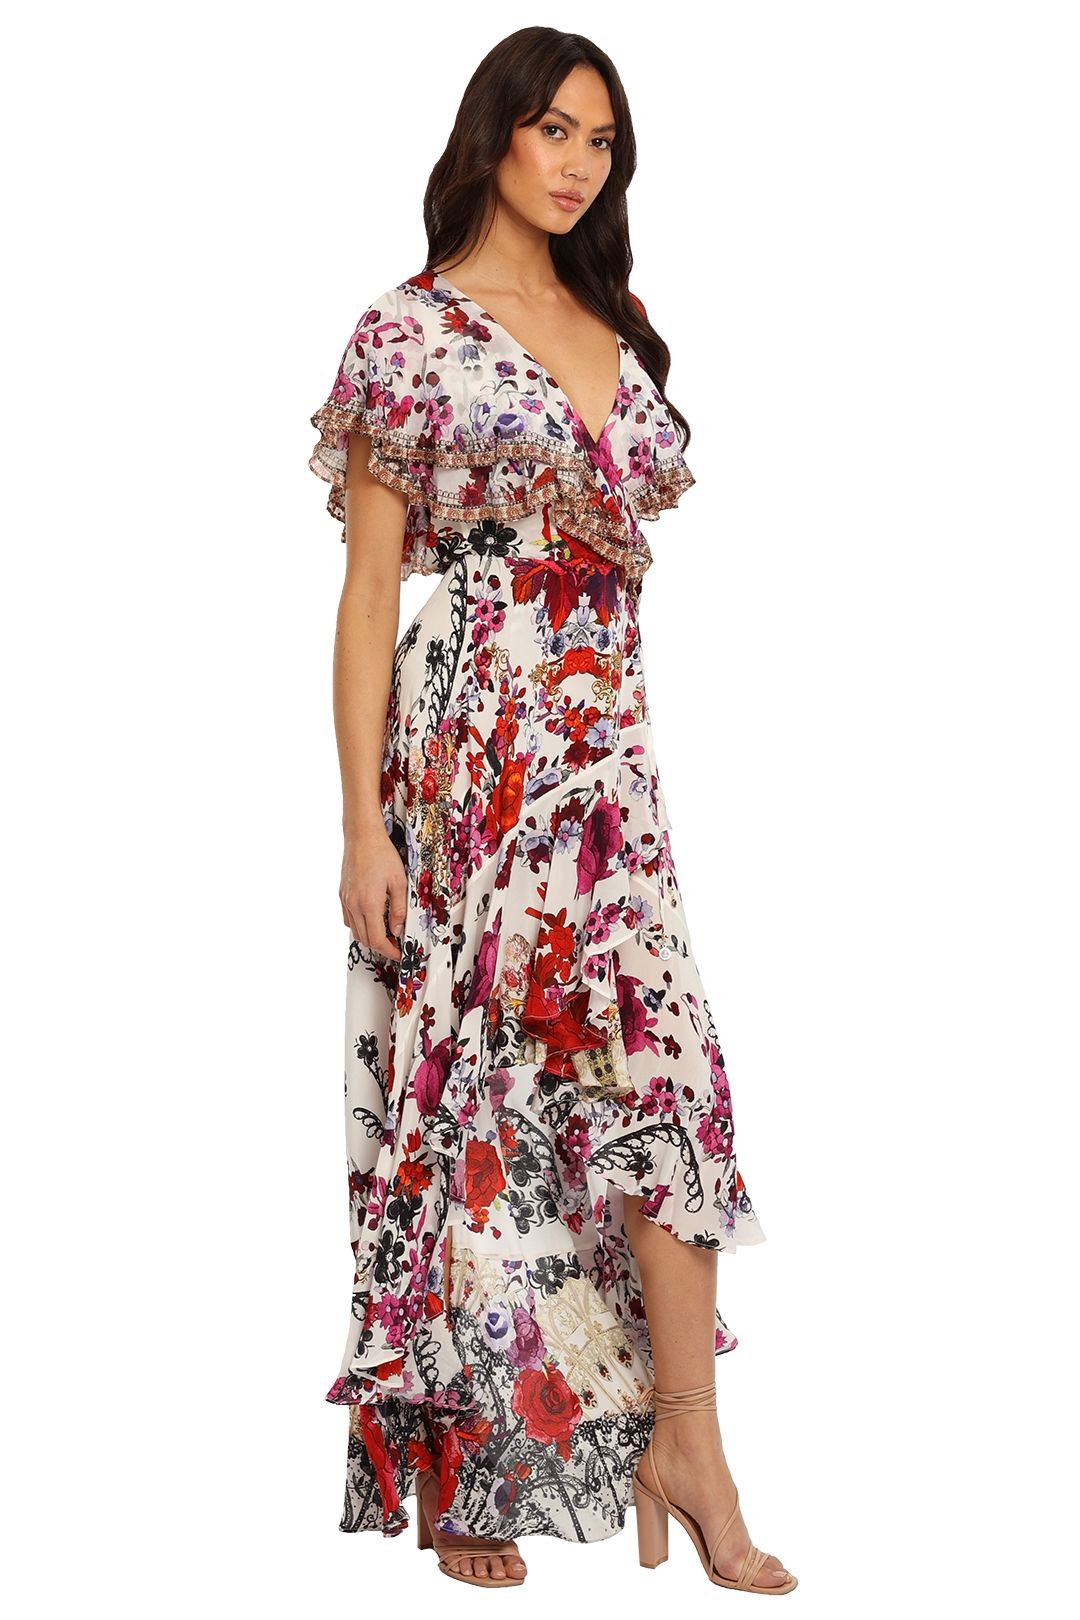 Camilla Reign Of Roses Tiered Midi Dress floral